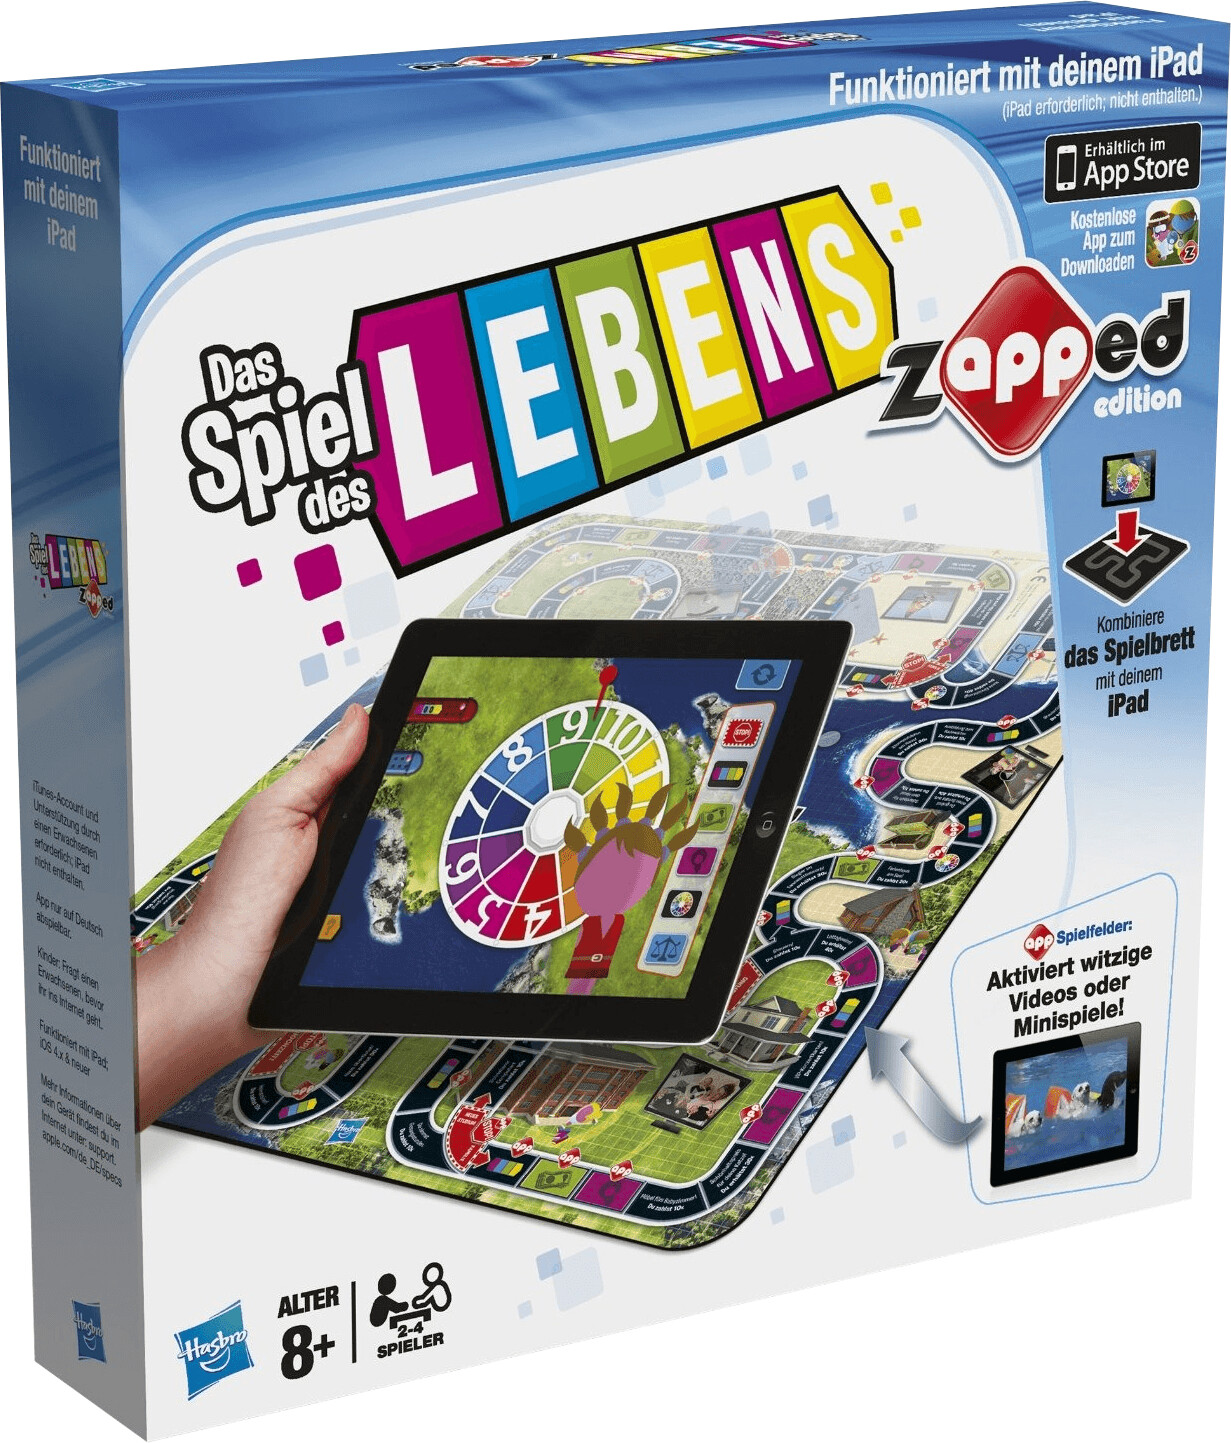 The Game of Life: zAPPed Edition